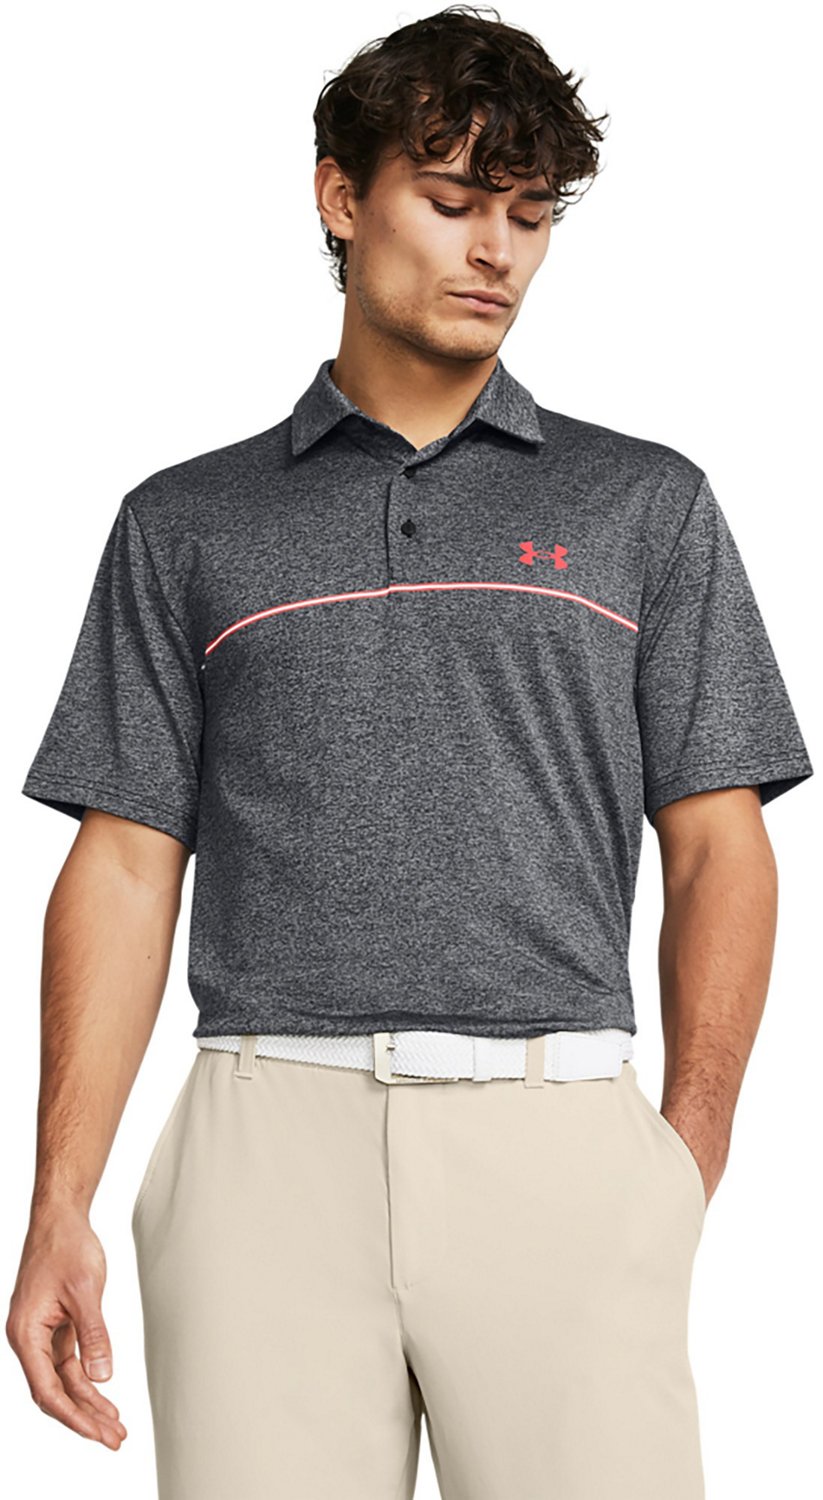 Under Armour Mens Playoff 3.0 Striped Polo